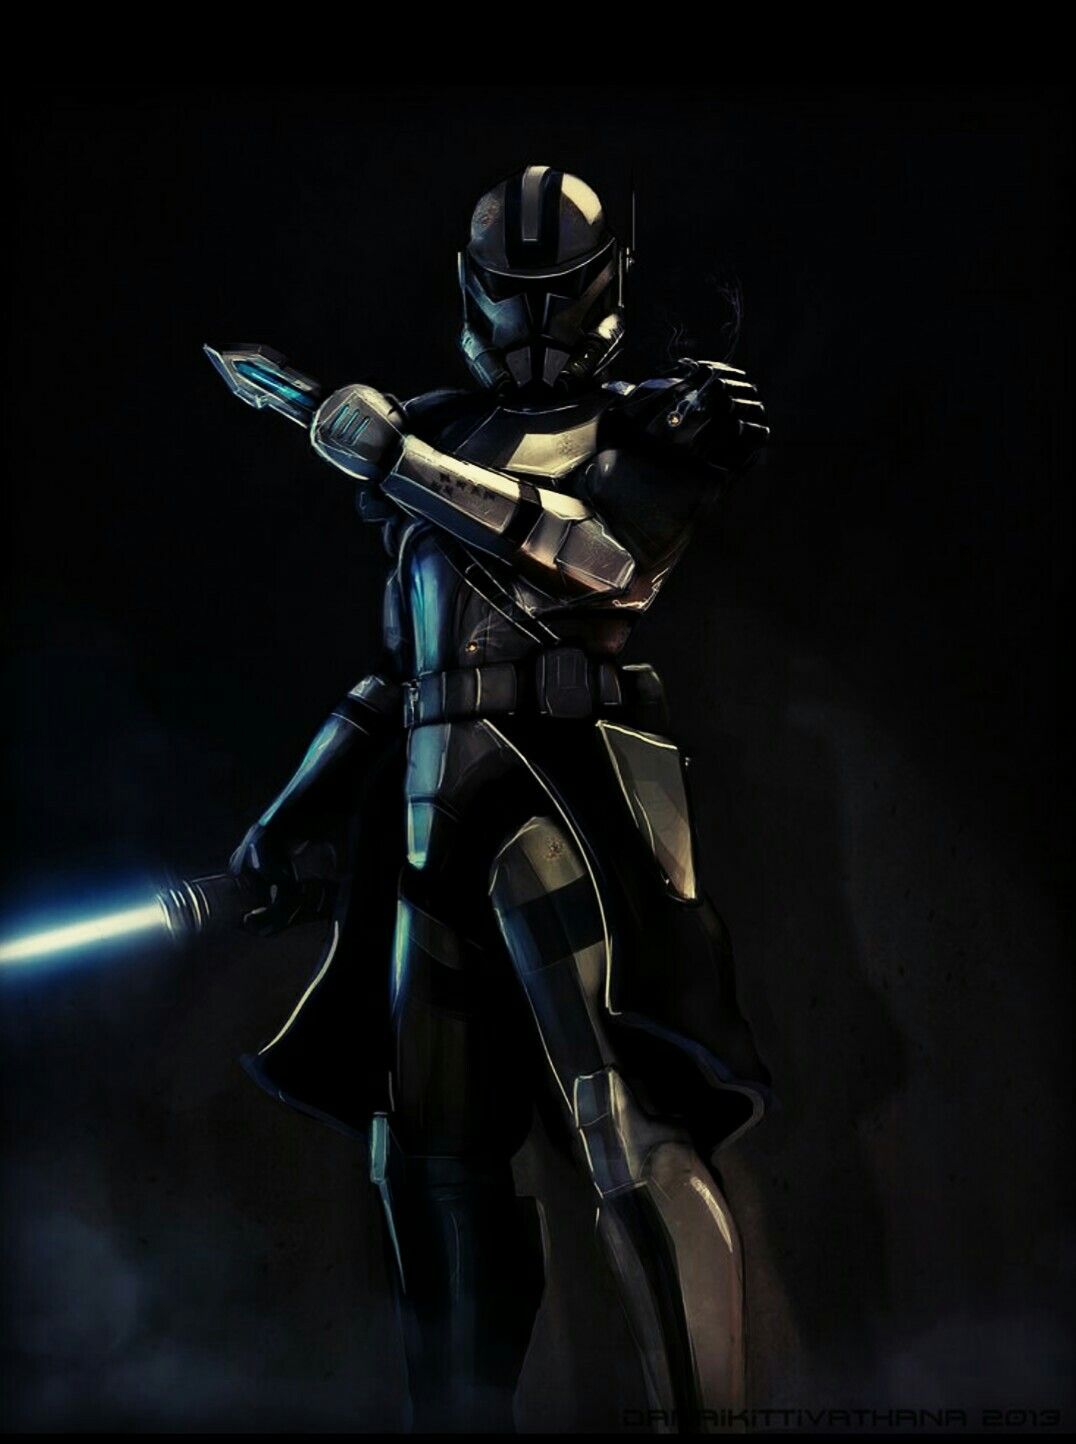 Clone assassin. Star wars image, Star wars trooper, Star wars characters picture